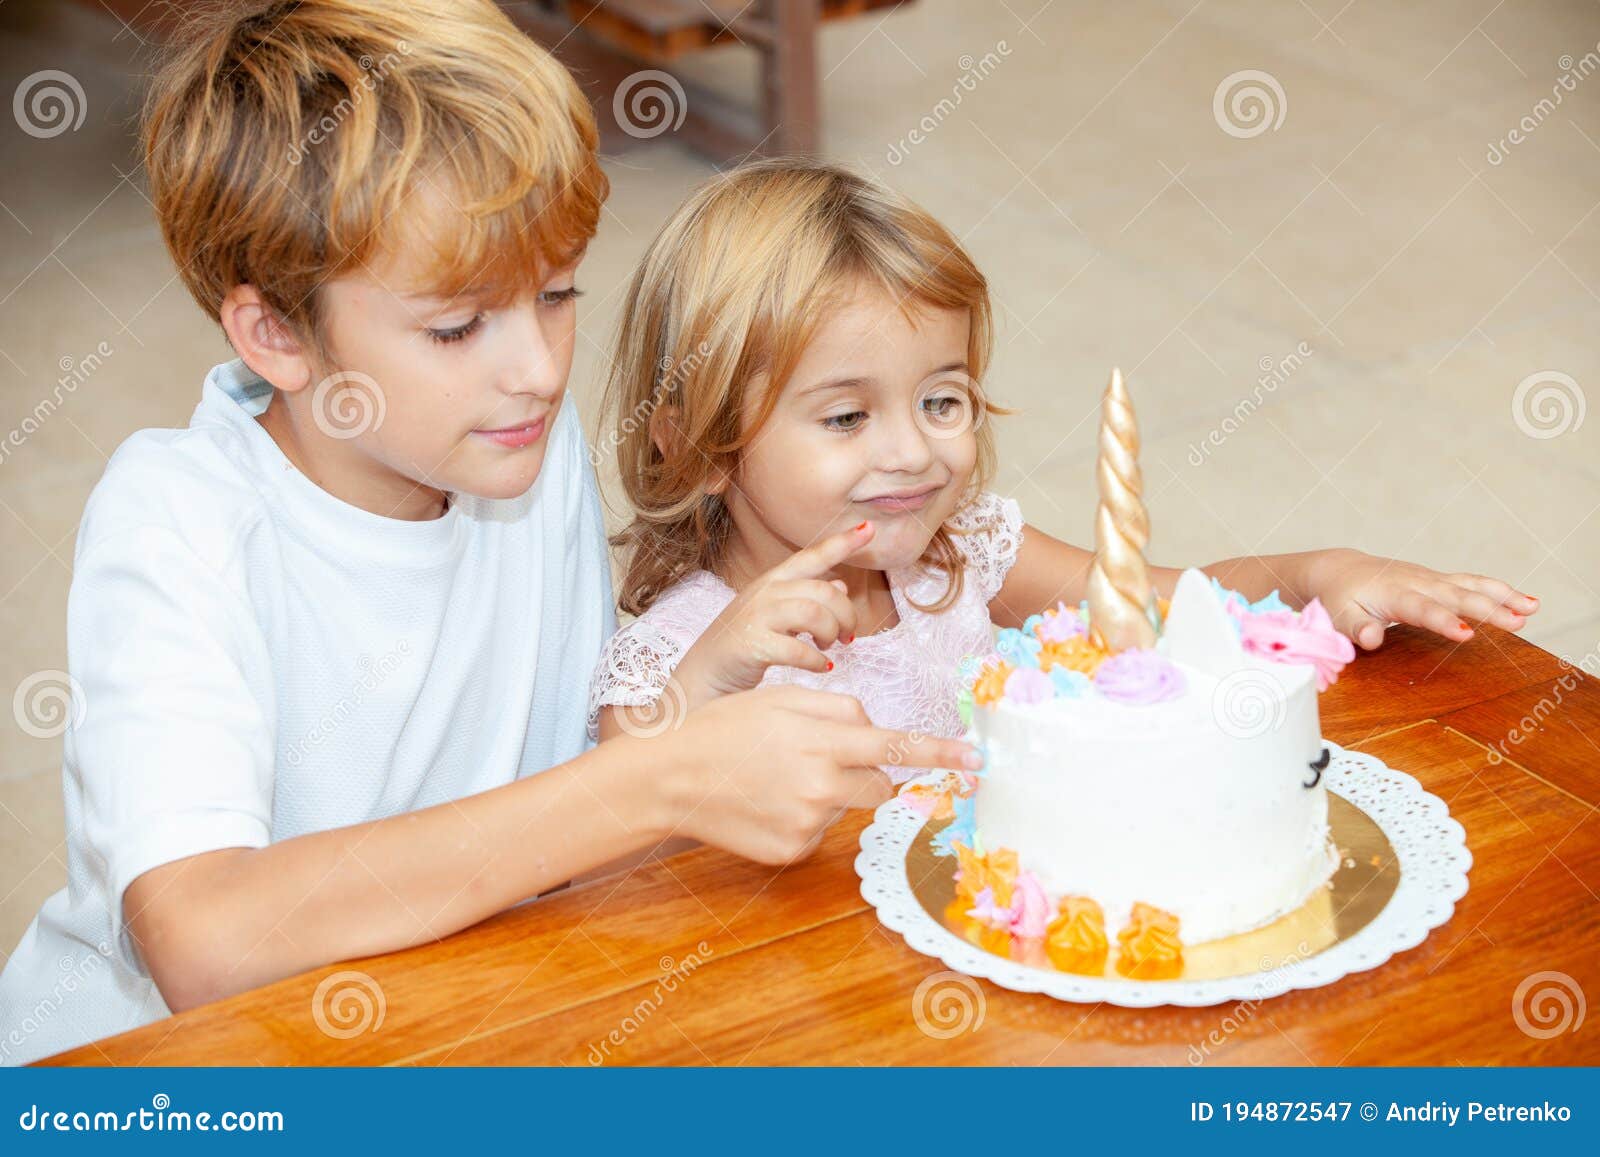 Brother and Sister on Birthday Stock Image - Image of holiday ...